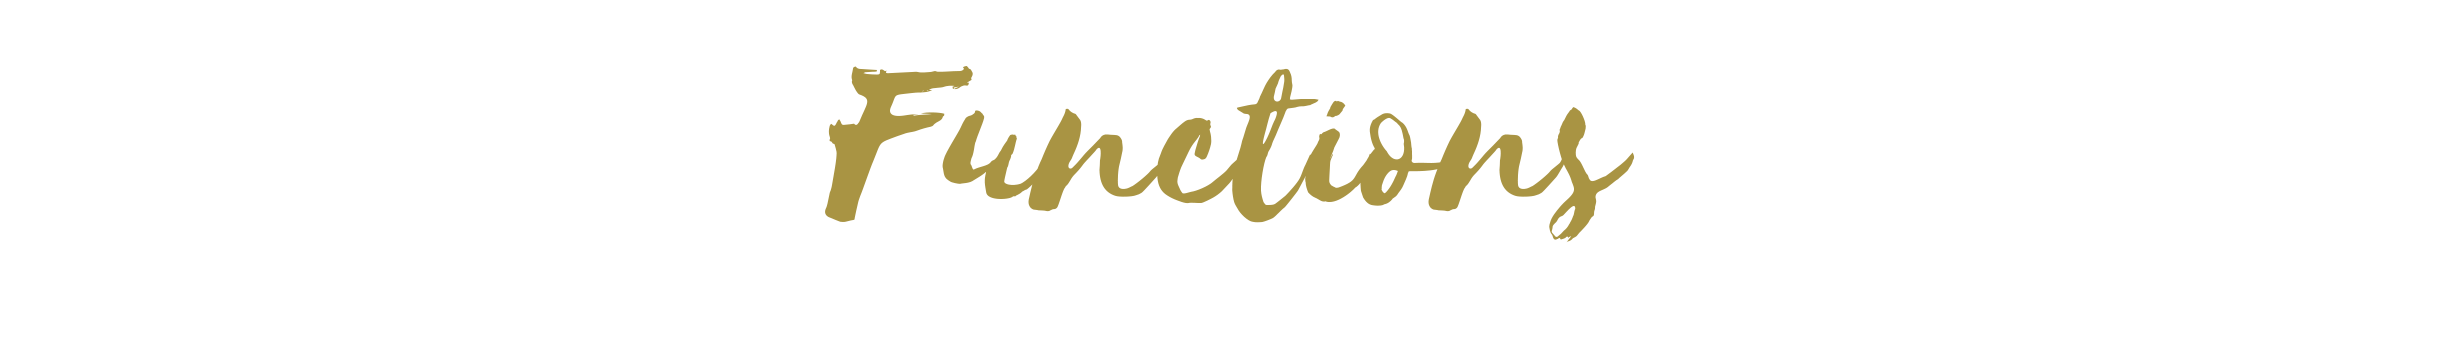 Functions Font